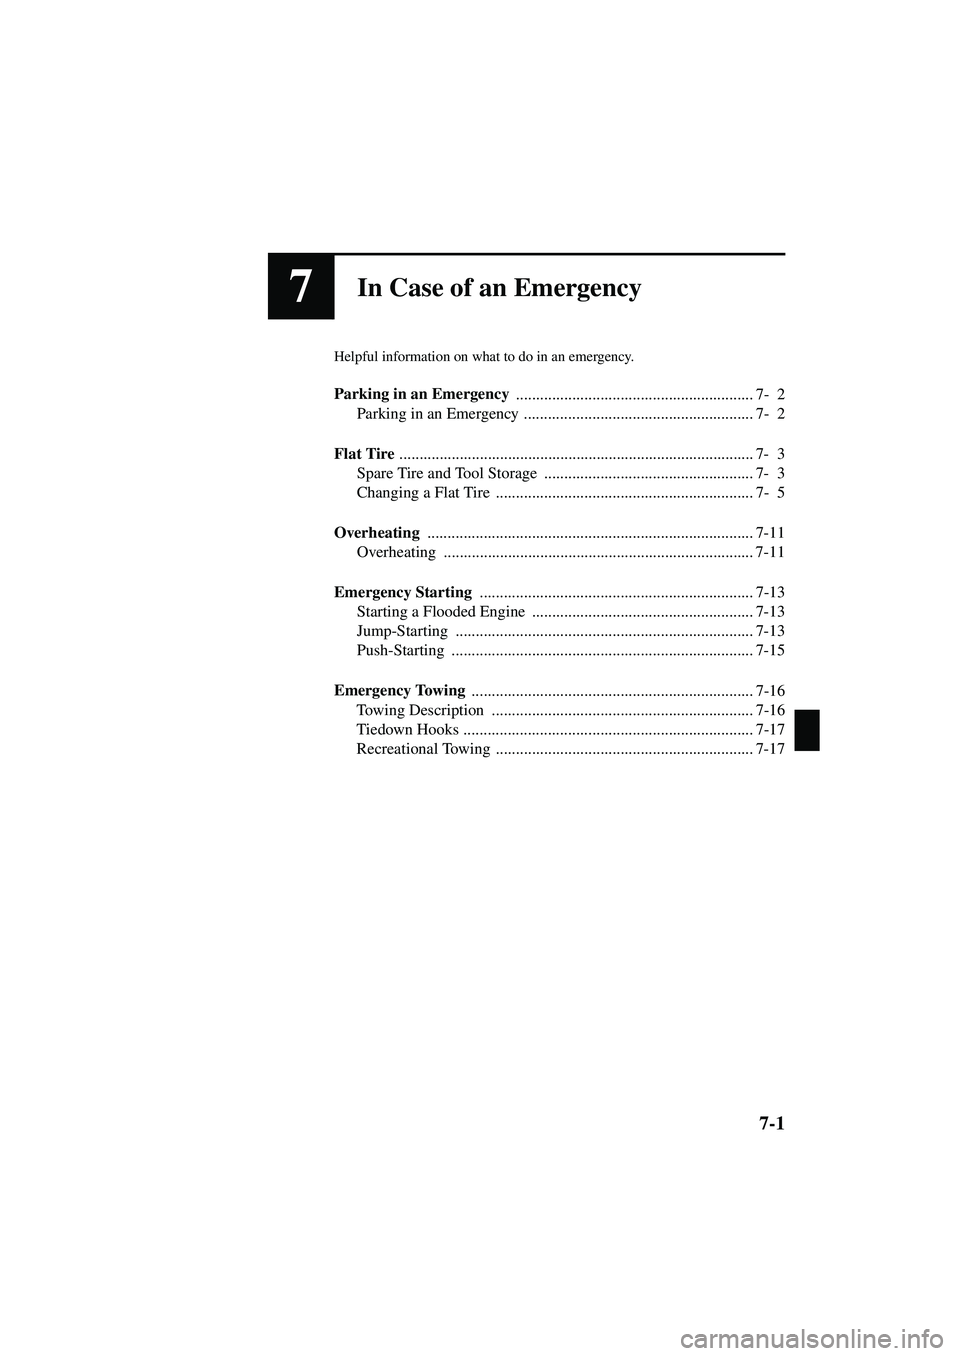 MAZDA MODEL MX-5 MIATA 2002  Owners Manual 7-1
Form No. 8Q42-EA-01F
7In Case of an Emergency
Helpful information on what to do in an emergency.
Parking in an Emergency ........................................................... 7- 2
Parking in